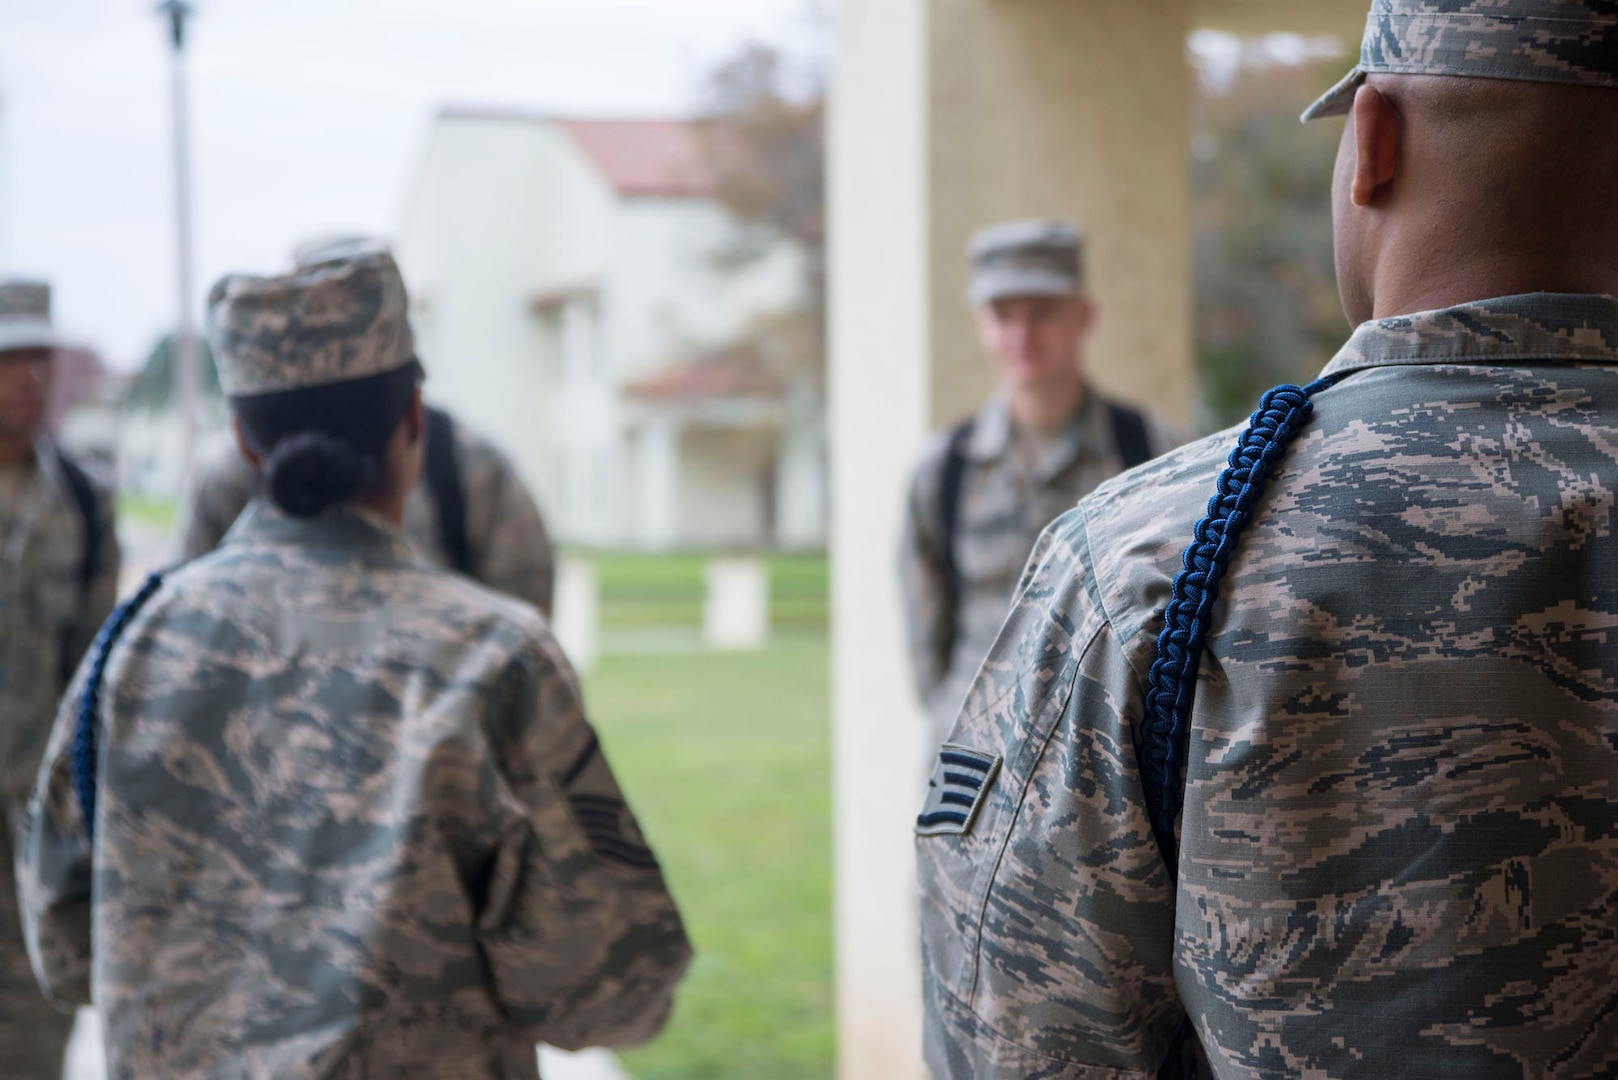 Master Sgt. Kelli Jackson (left), 558th Flying Training Squadron military training leader and superintendent, and Derius Jackson, 558th FTS military training leader and assistant flight chief, conduct morning formation with basic sensor operator technical training students at Joint Base San Antonio-Randolph Dec. 14, 2016. To become an MTL, a special duty, service members must be recommended by their leadership and graduate from a Military Training Leader Course at Keesler Air Force Base, Miss. (U.S. Air Force photo by Airman 1st Class Lauren Parsons/Released)